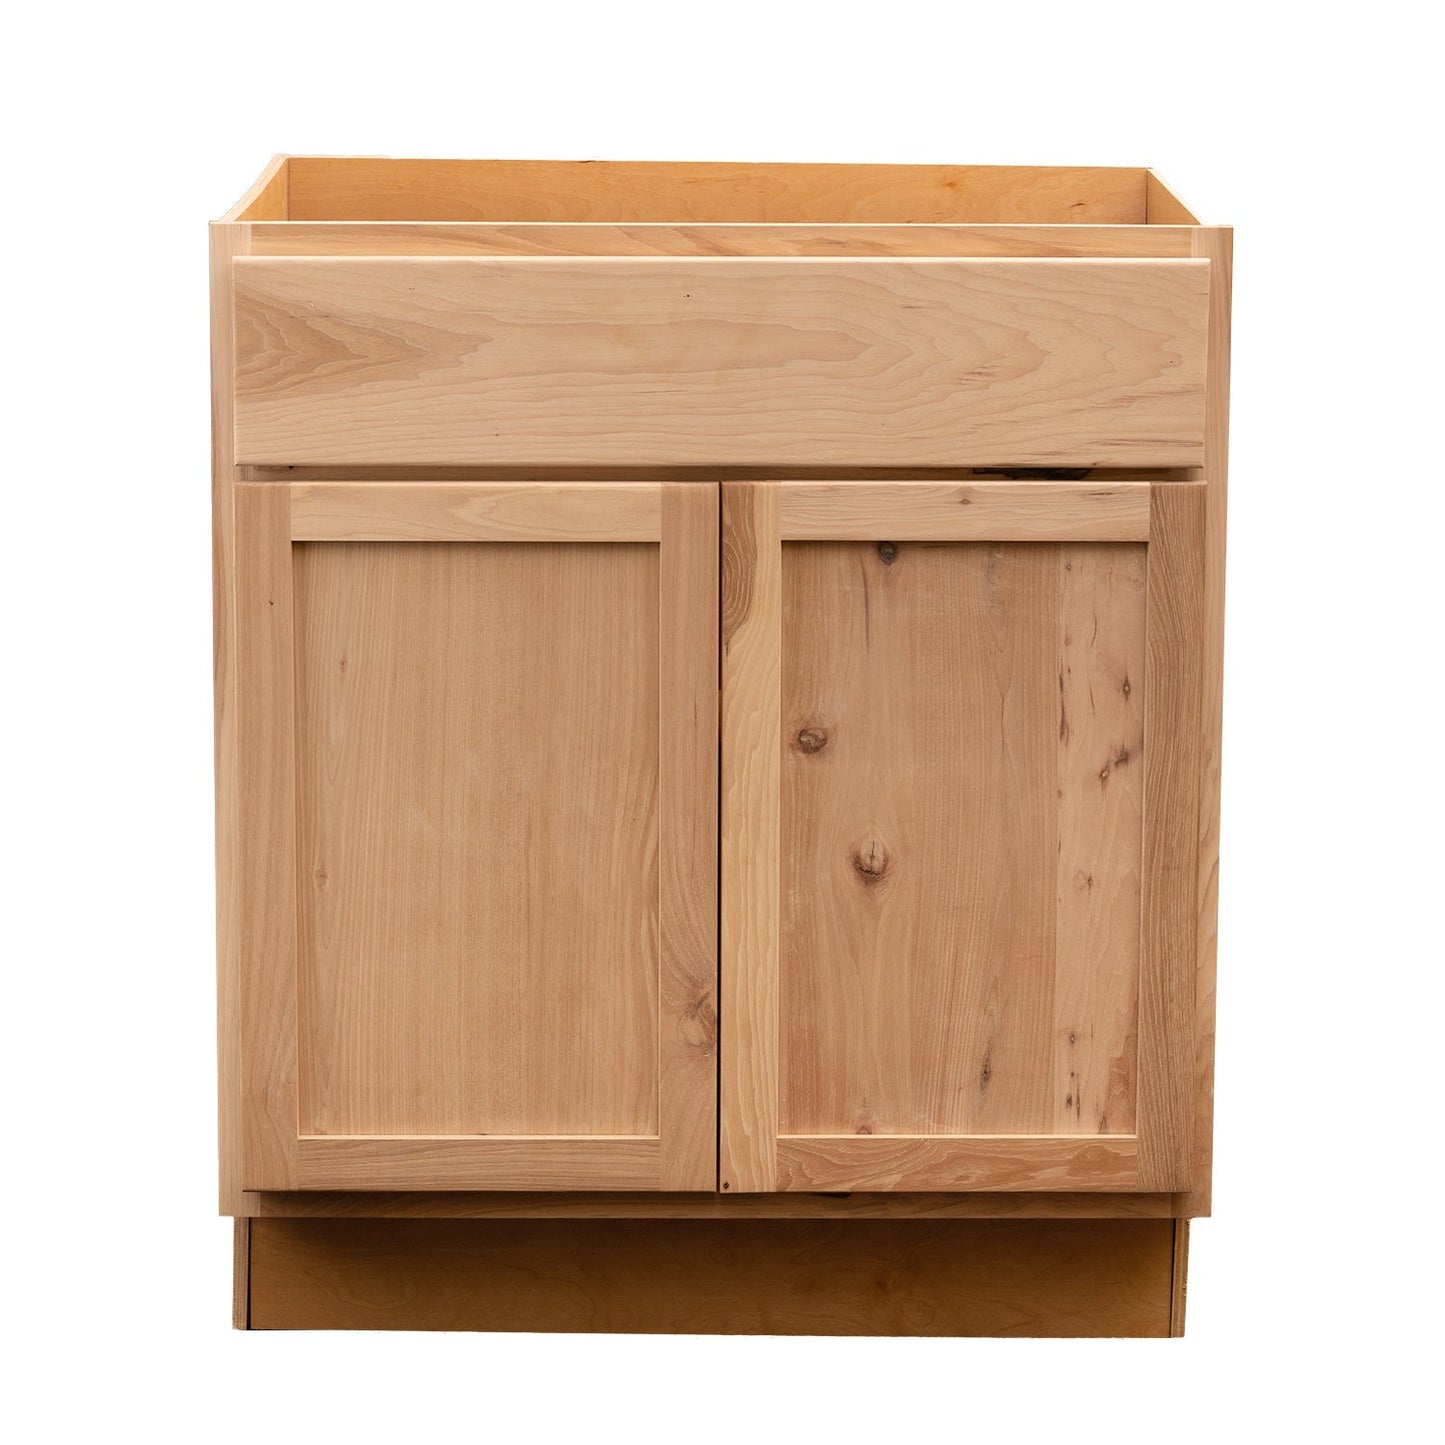 Quicklock RTA (Ready-to-Assemble) Raw Hickory Sink Base Cabinet